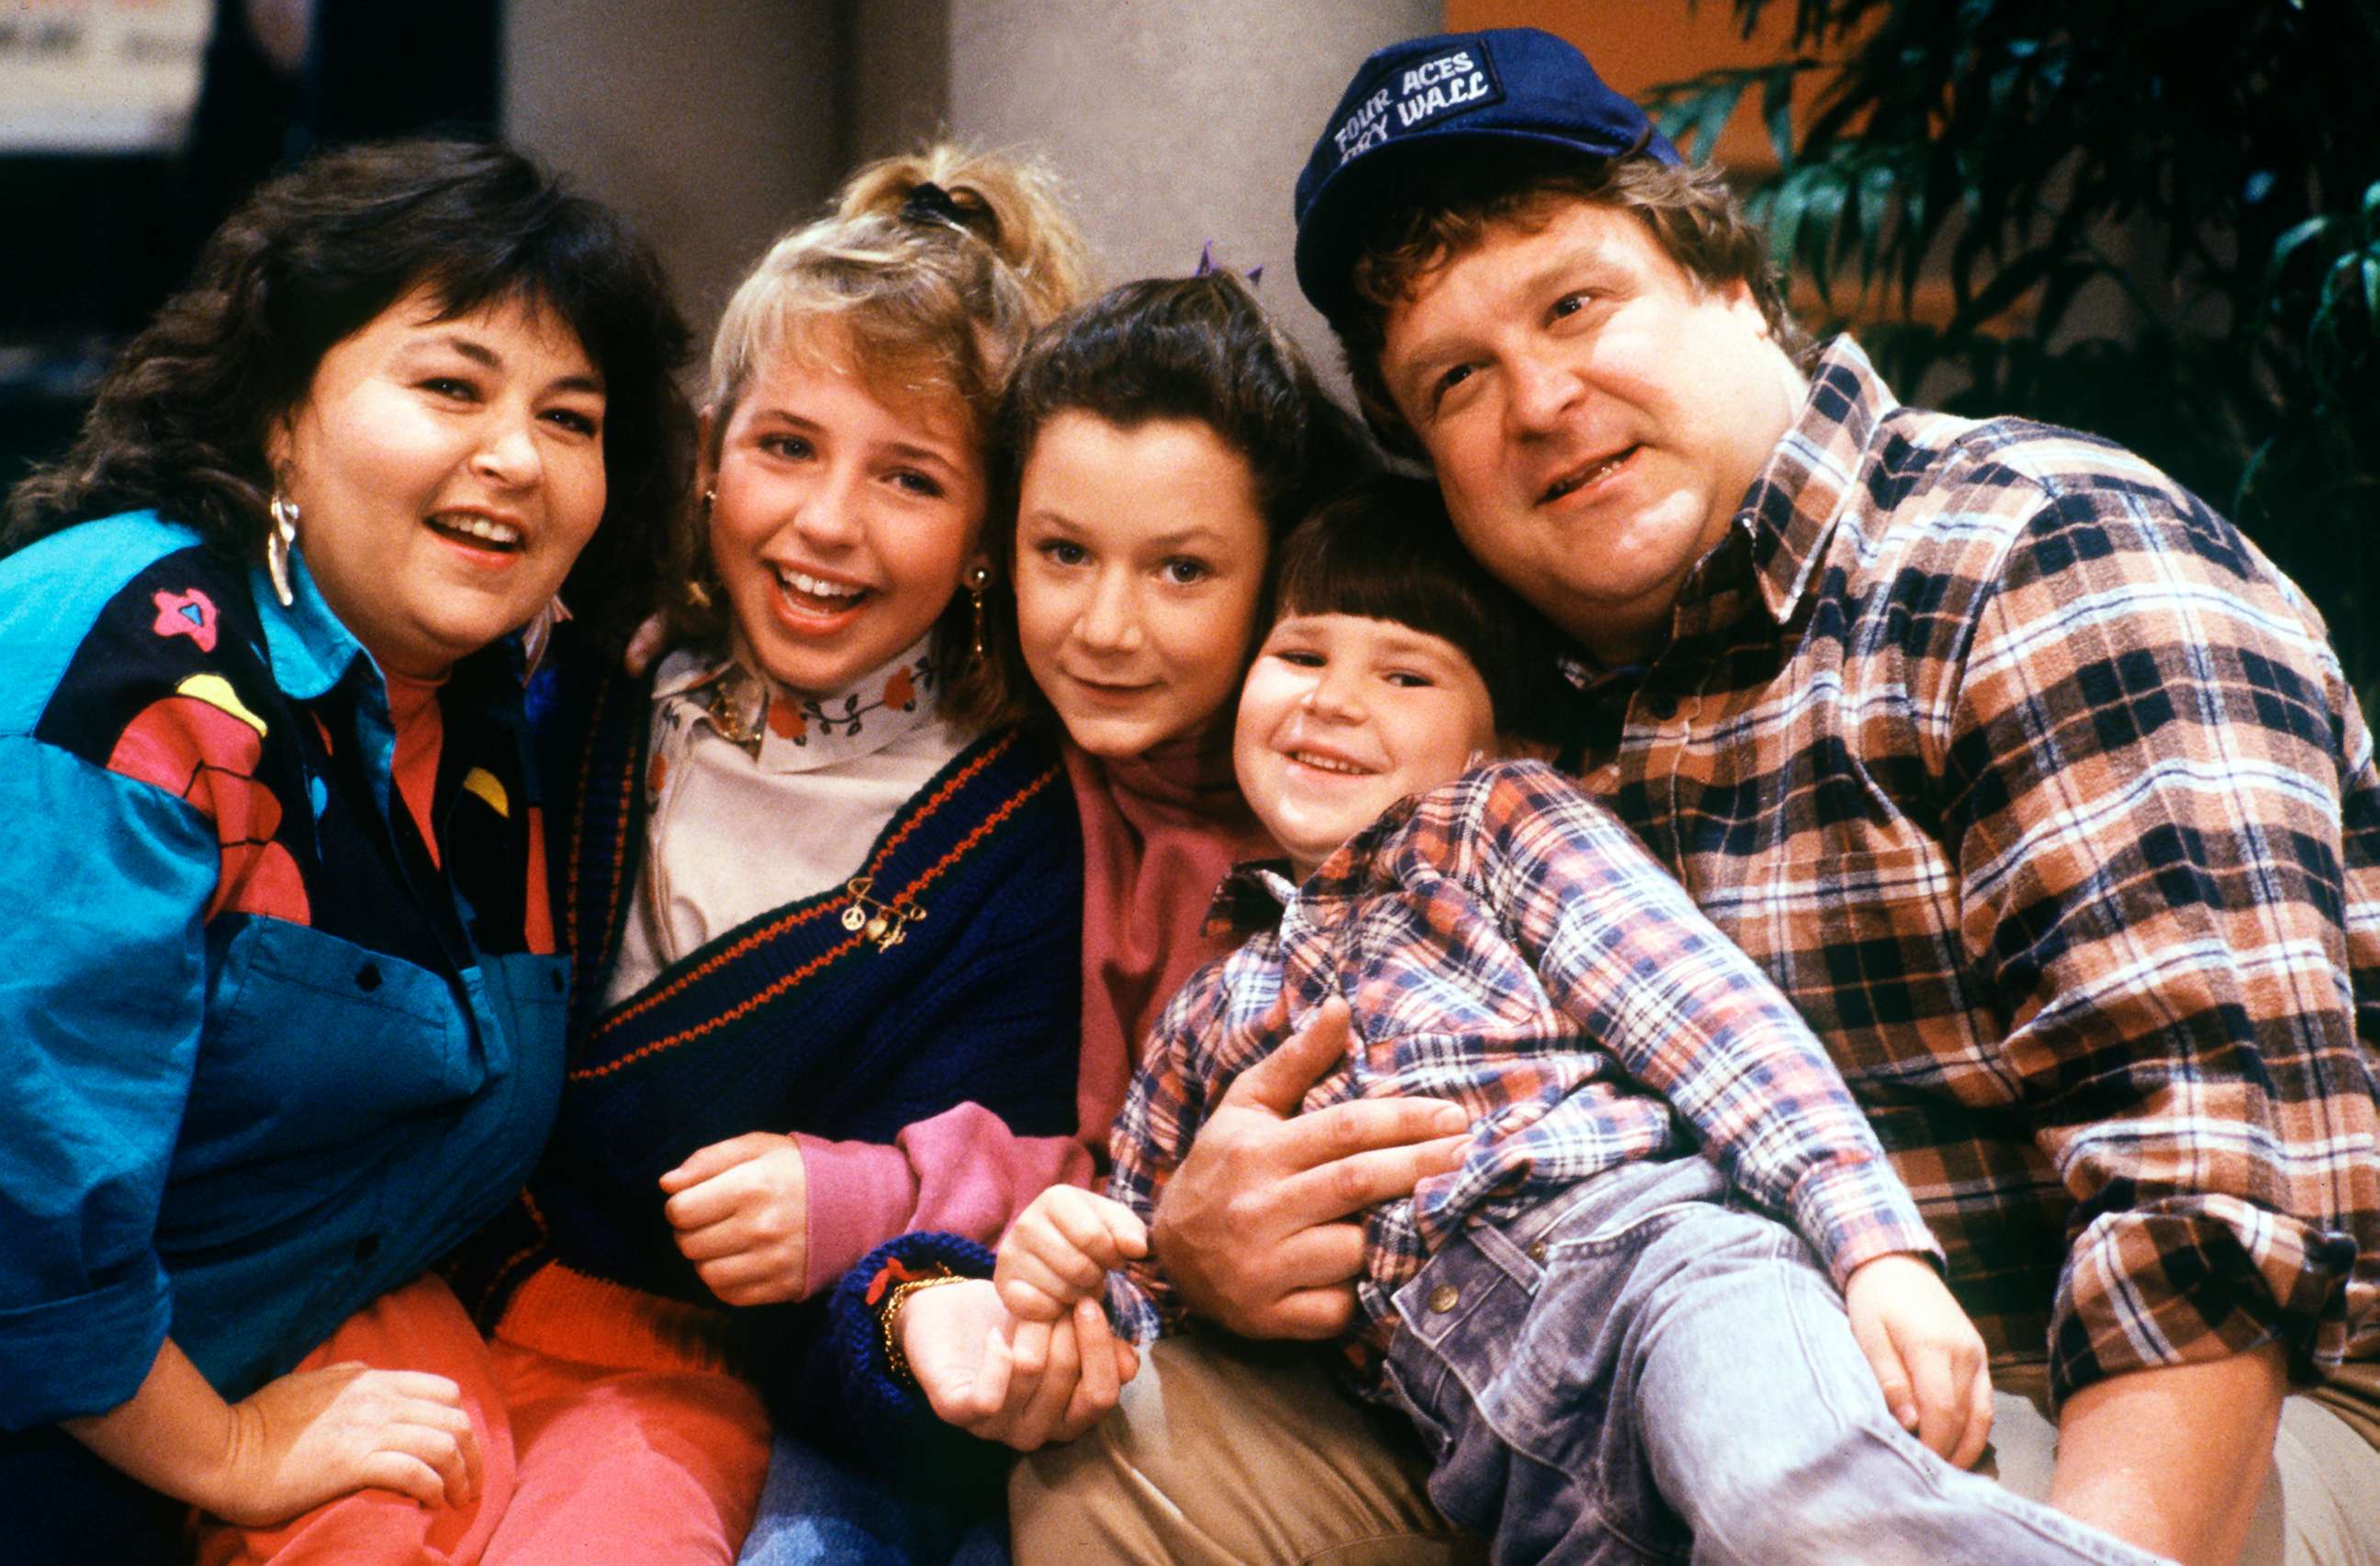 PHOTO: The cast of the iconic comedy series "Roseanne" from season one pictured on Dec. 12, 1988. The series returns to the ABC Television Network on March 27, 2018 with the complete original cast.